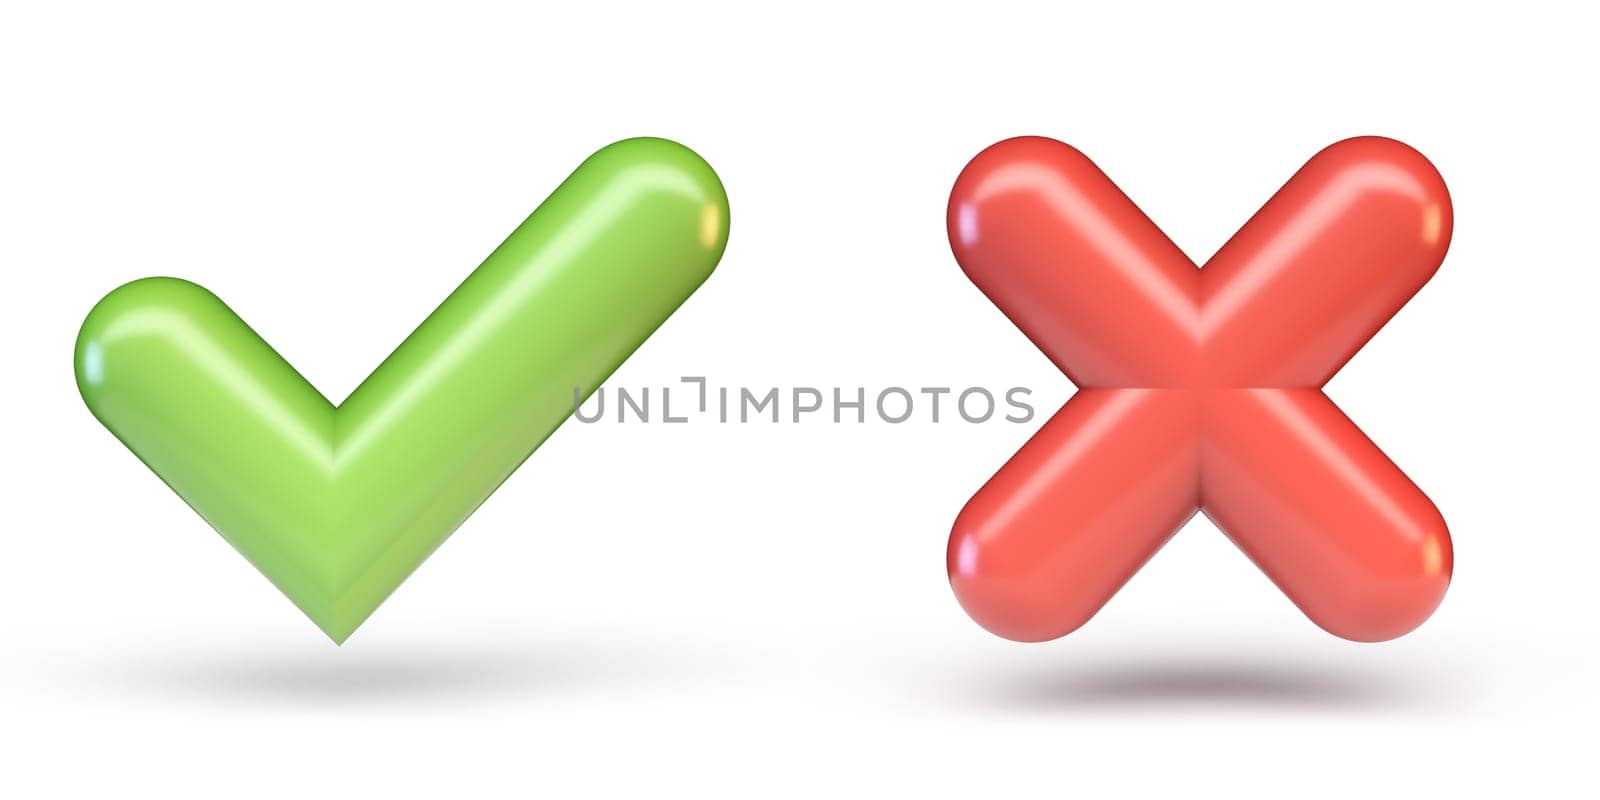 Green correct and red incorrect sign 3D rendering illustration isolated on white background